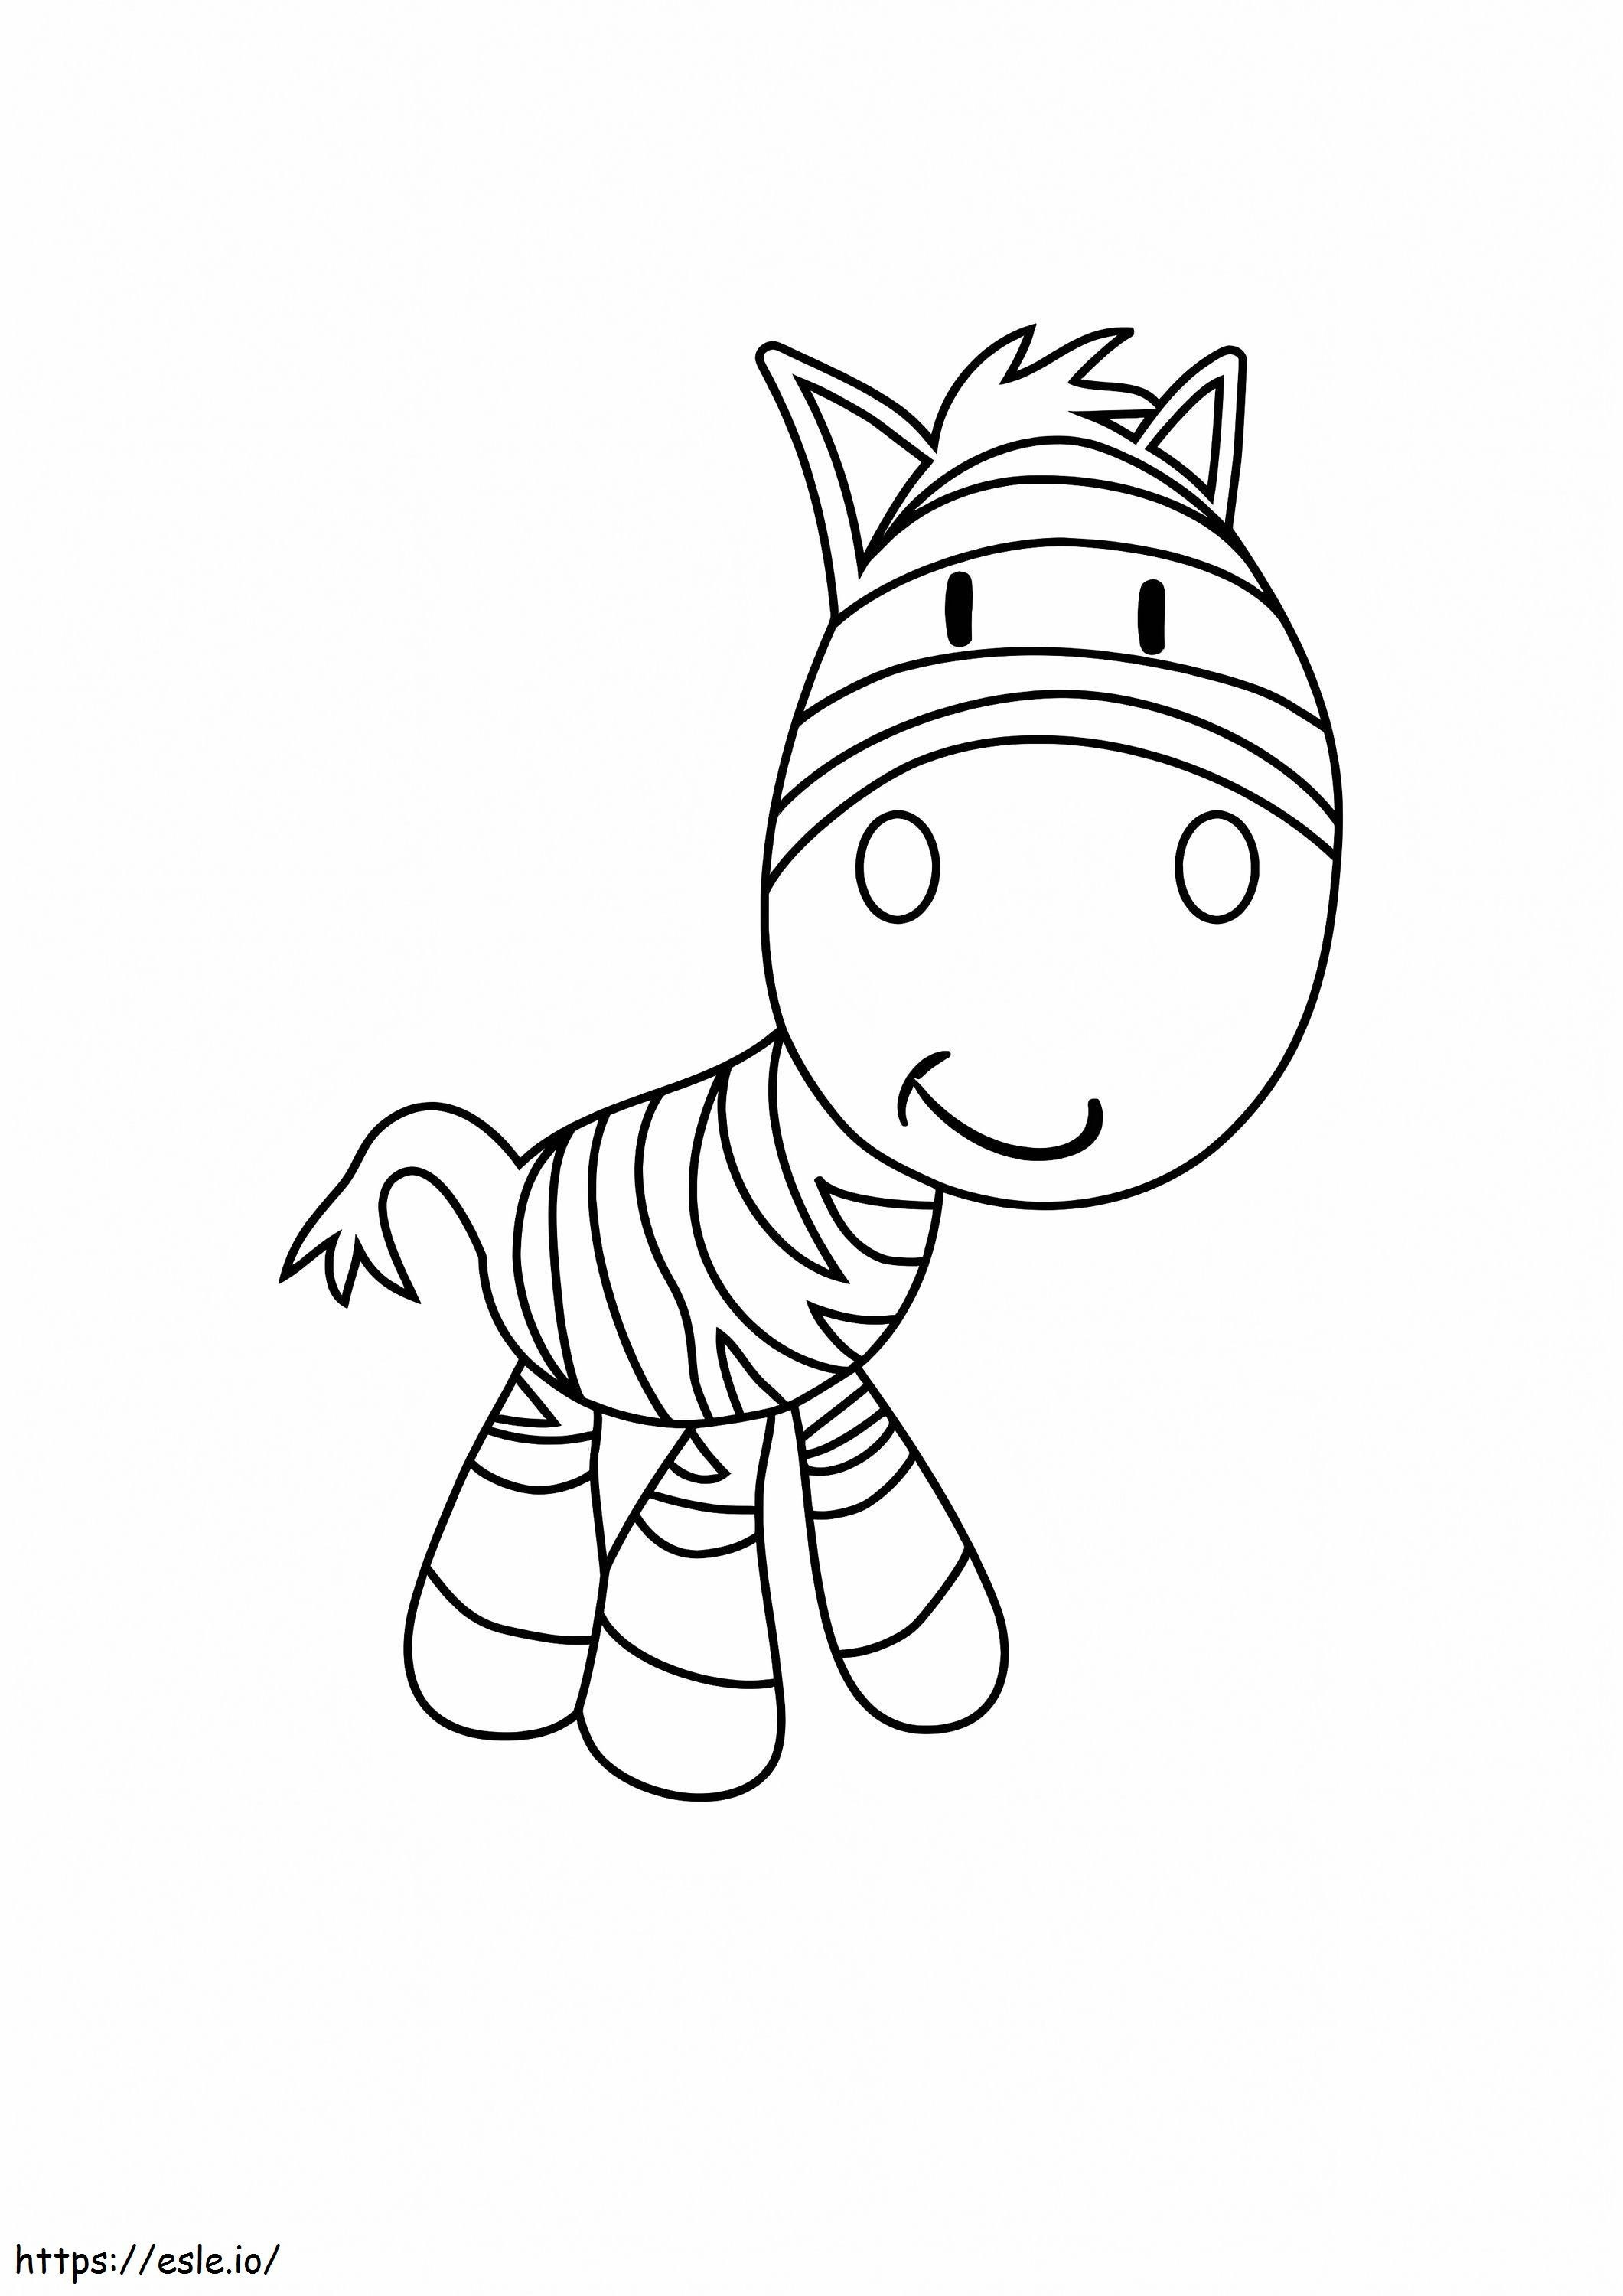 Cartoon Smiling Zebra coloring page